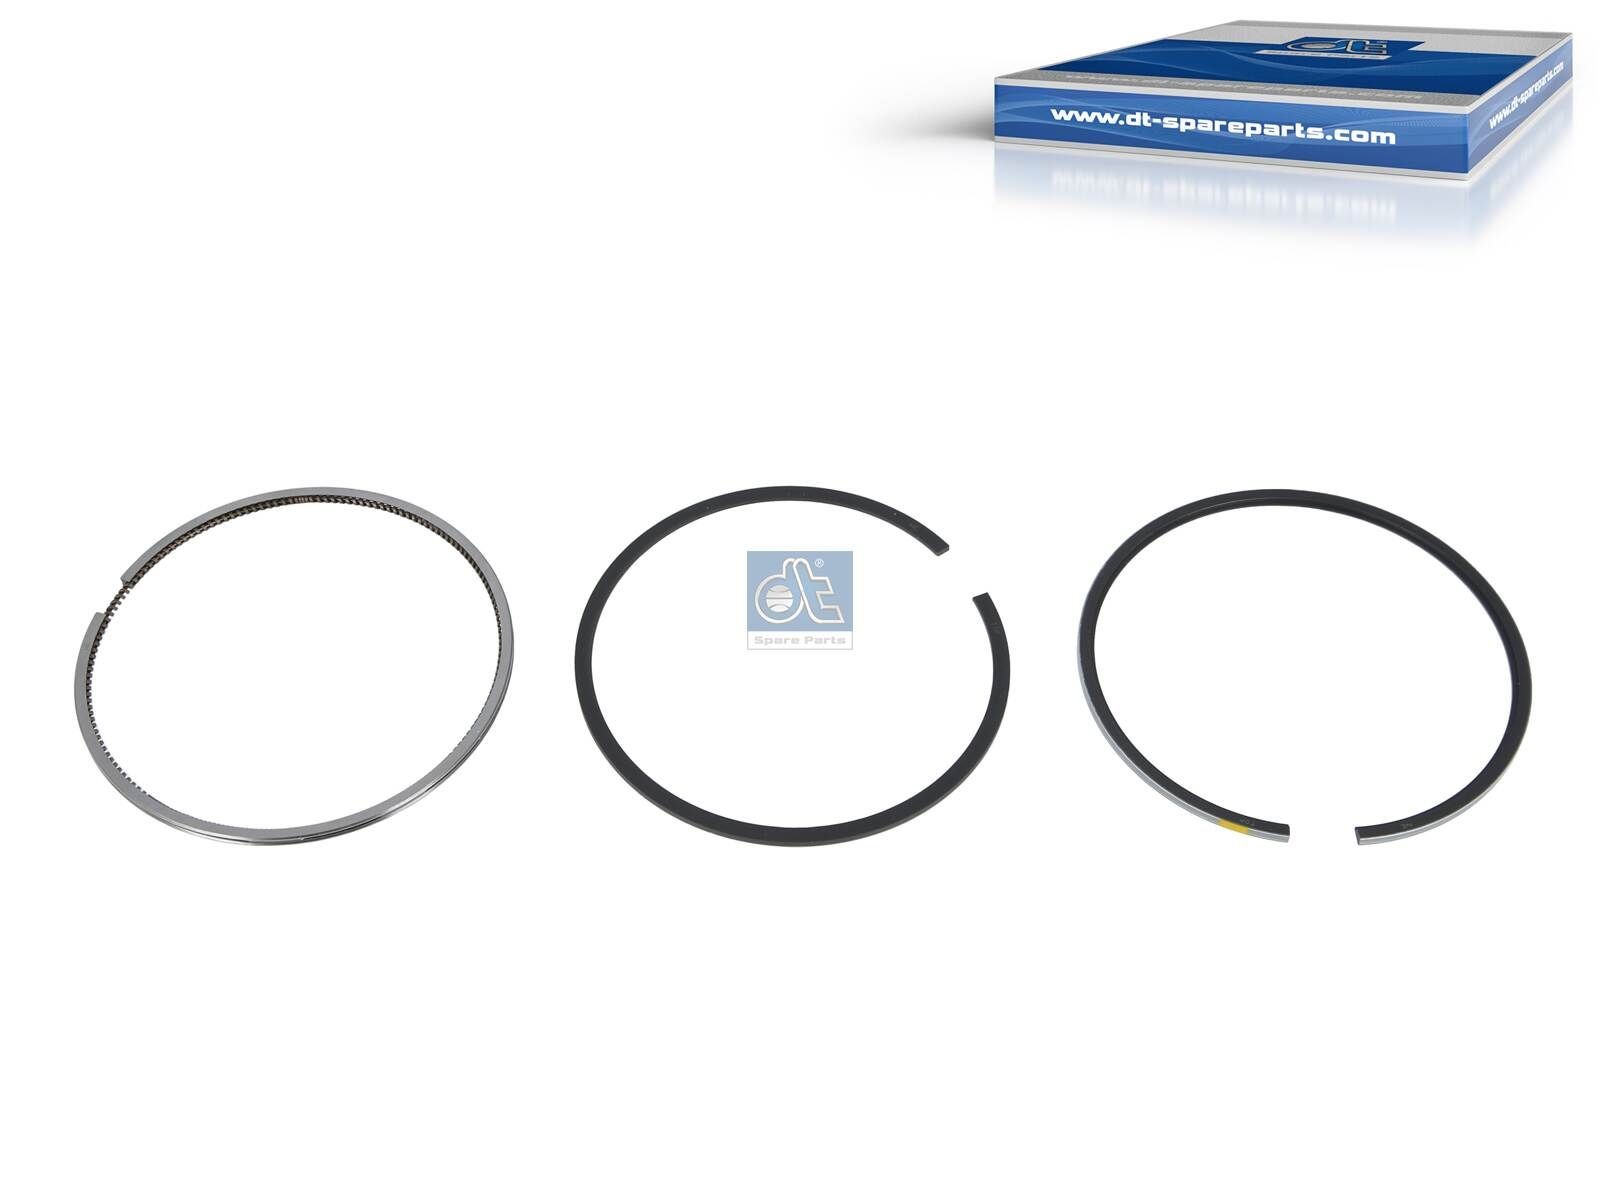 099 RS 00127 0N0 DT Spare Parts 2.94579 Piston Ring Kit 2079 3531